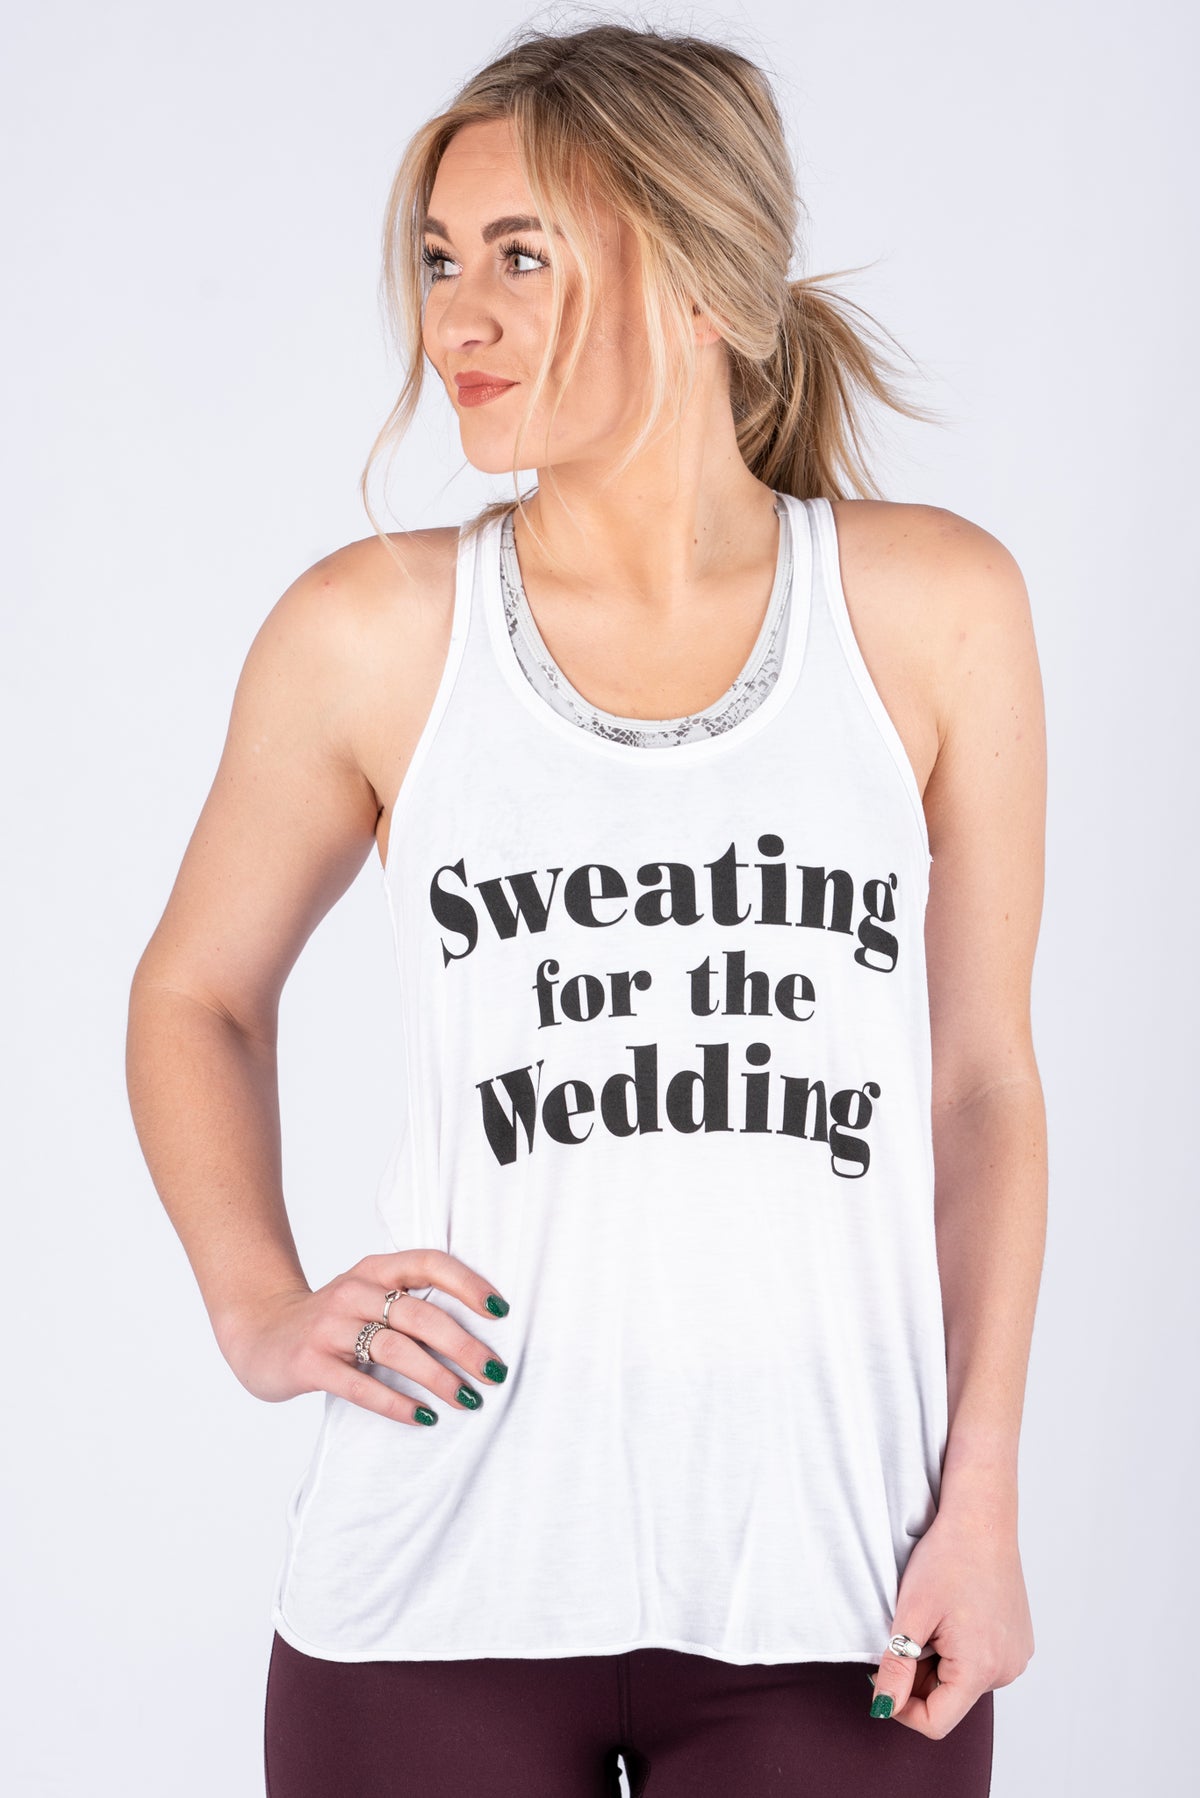 Sweating for the wedding racer flowy tank top white - Stylish Tank Top - Trendy Graphic T-Shirts and Tank Tops at Lush Fashion Lounge Boutique in Oklahoma City